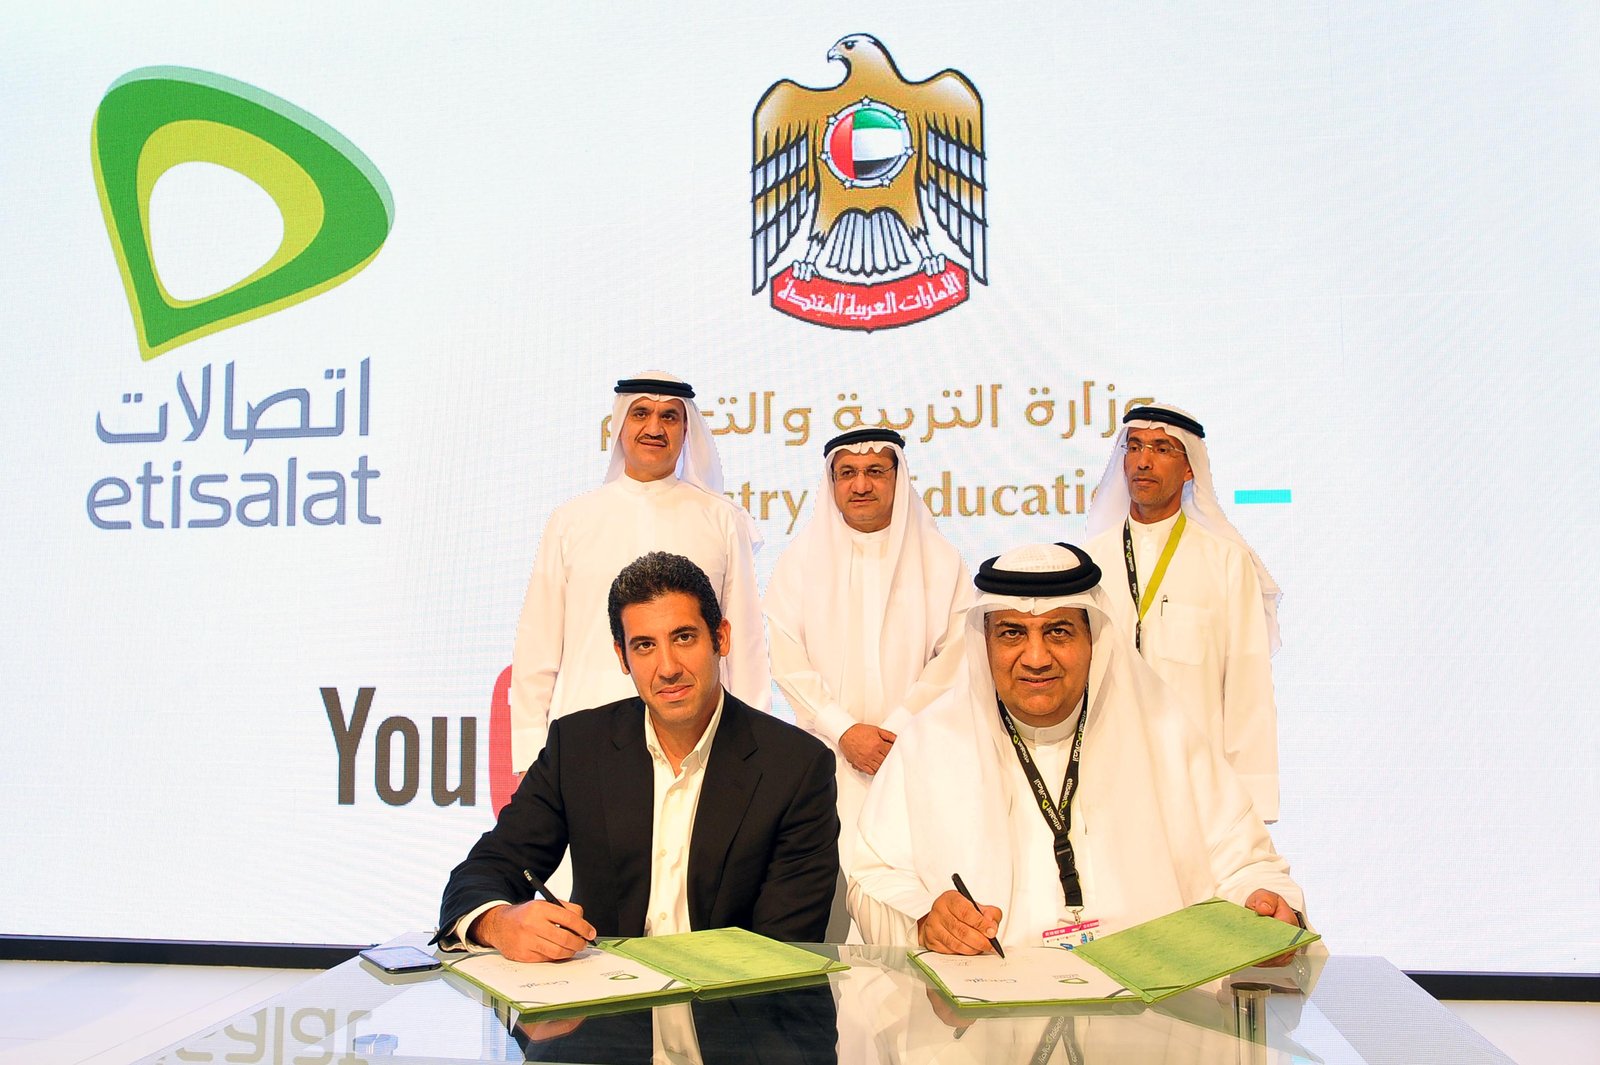 Etisalat partners with Ministry of Education for Duroosi video launch